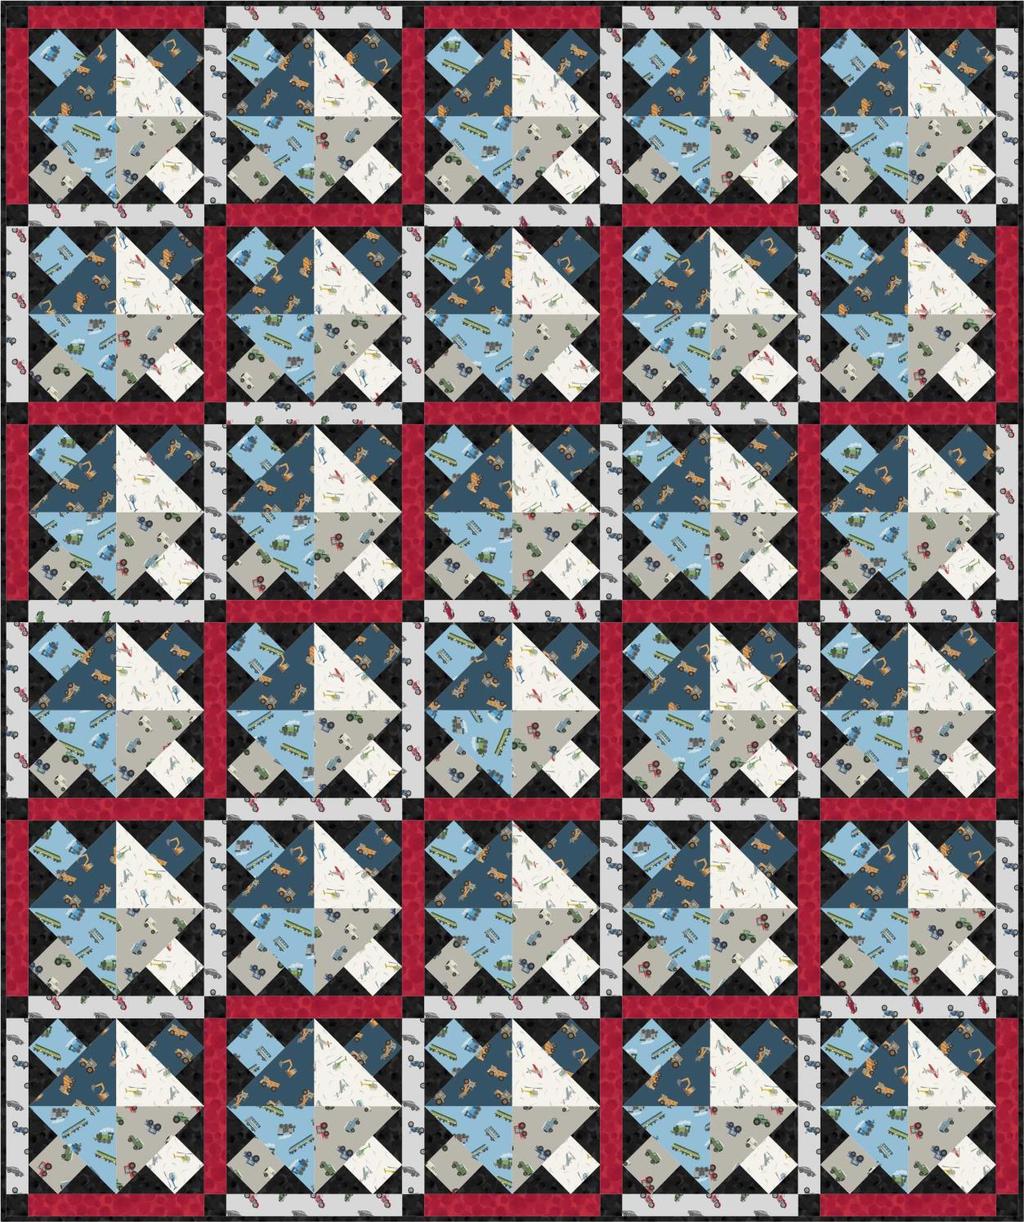 Small Things on the Move Quilt (Design 2) Designed and made by Sally Ablett Size: 46 x 55 Block: 8½ x 8½ QUILT 2 FABRIC REQUIREMENTS (Small Things on the Move Collection) Fabric 1: ½yd - ½mtr - SM11.